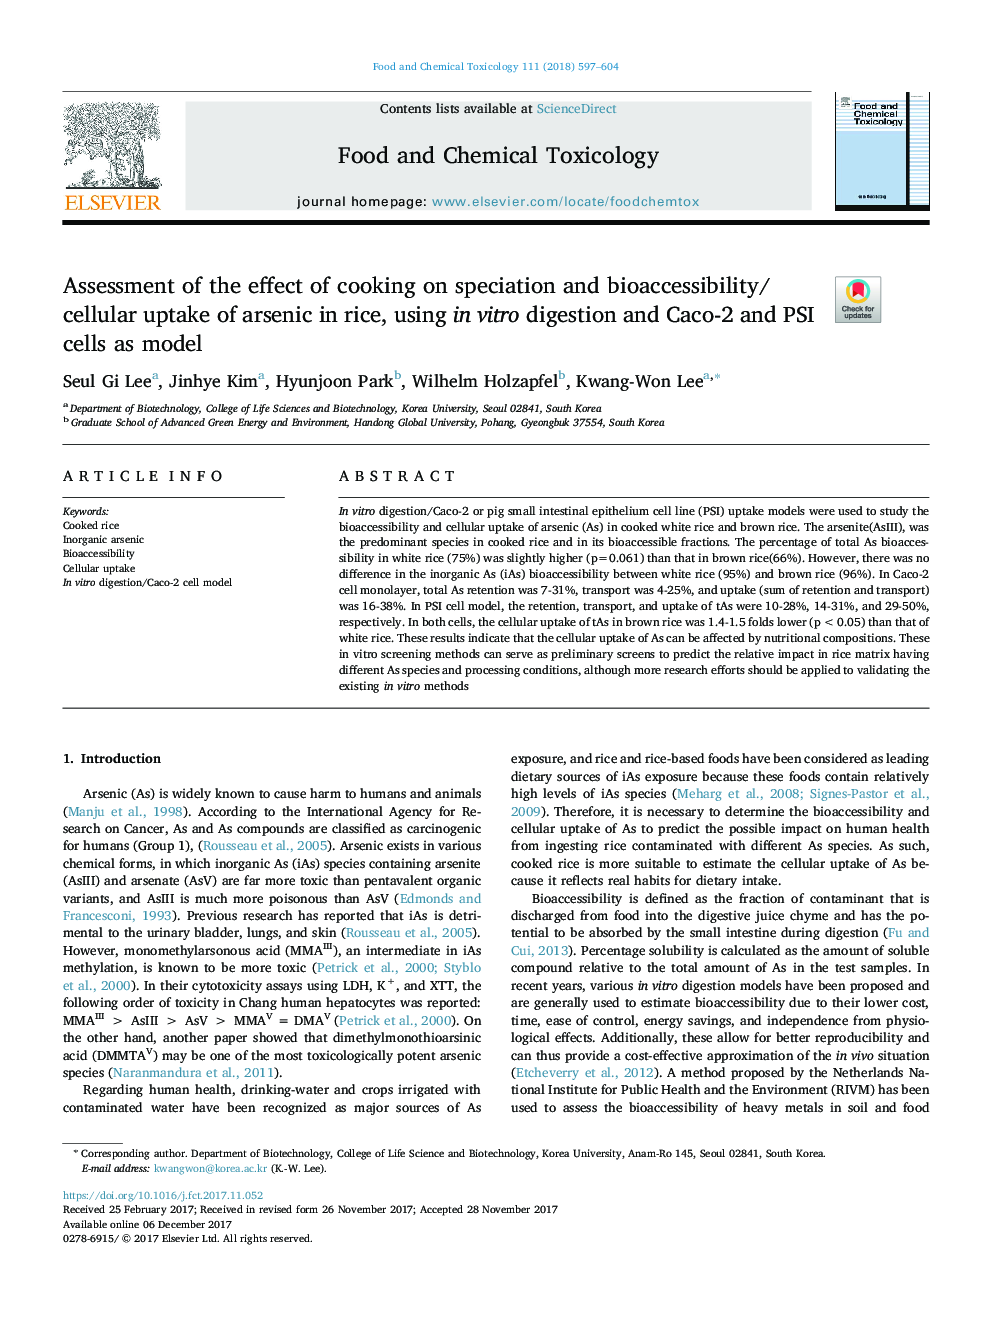 Assessment of the effect of cooking on speciation and bioaccessibility/cellular uptake of arsenic in rice, using in vitro digestion and Caco-2 and PSI cells as model